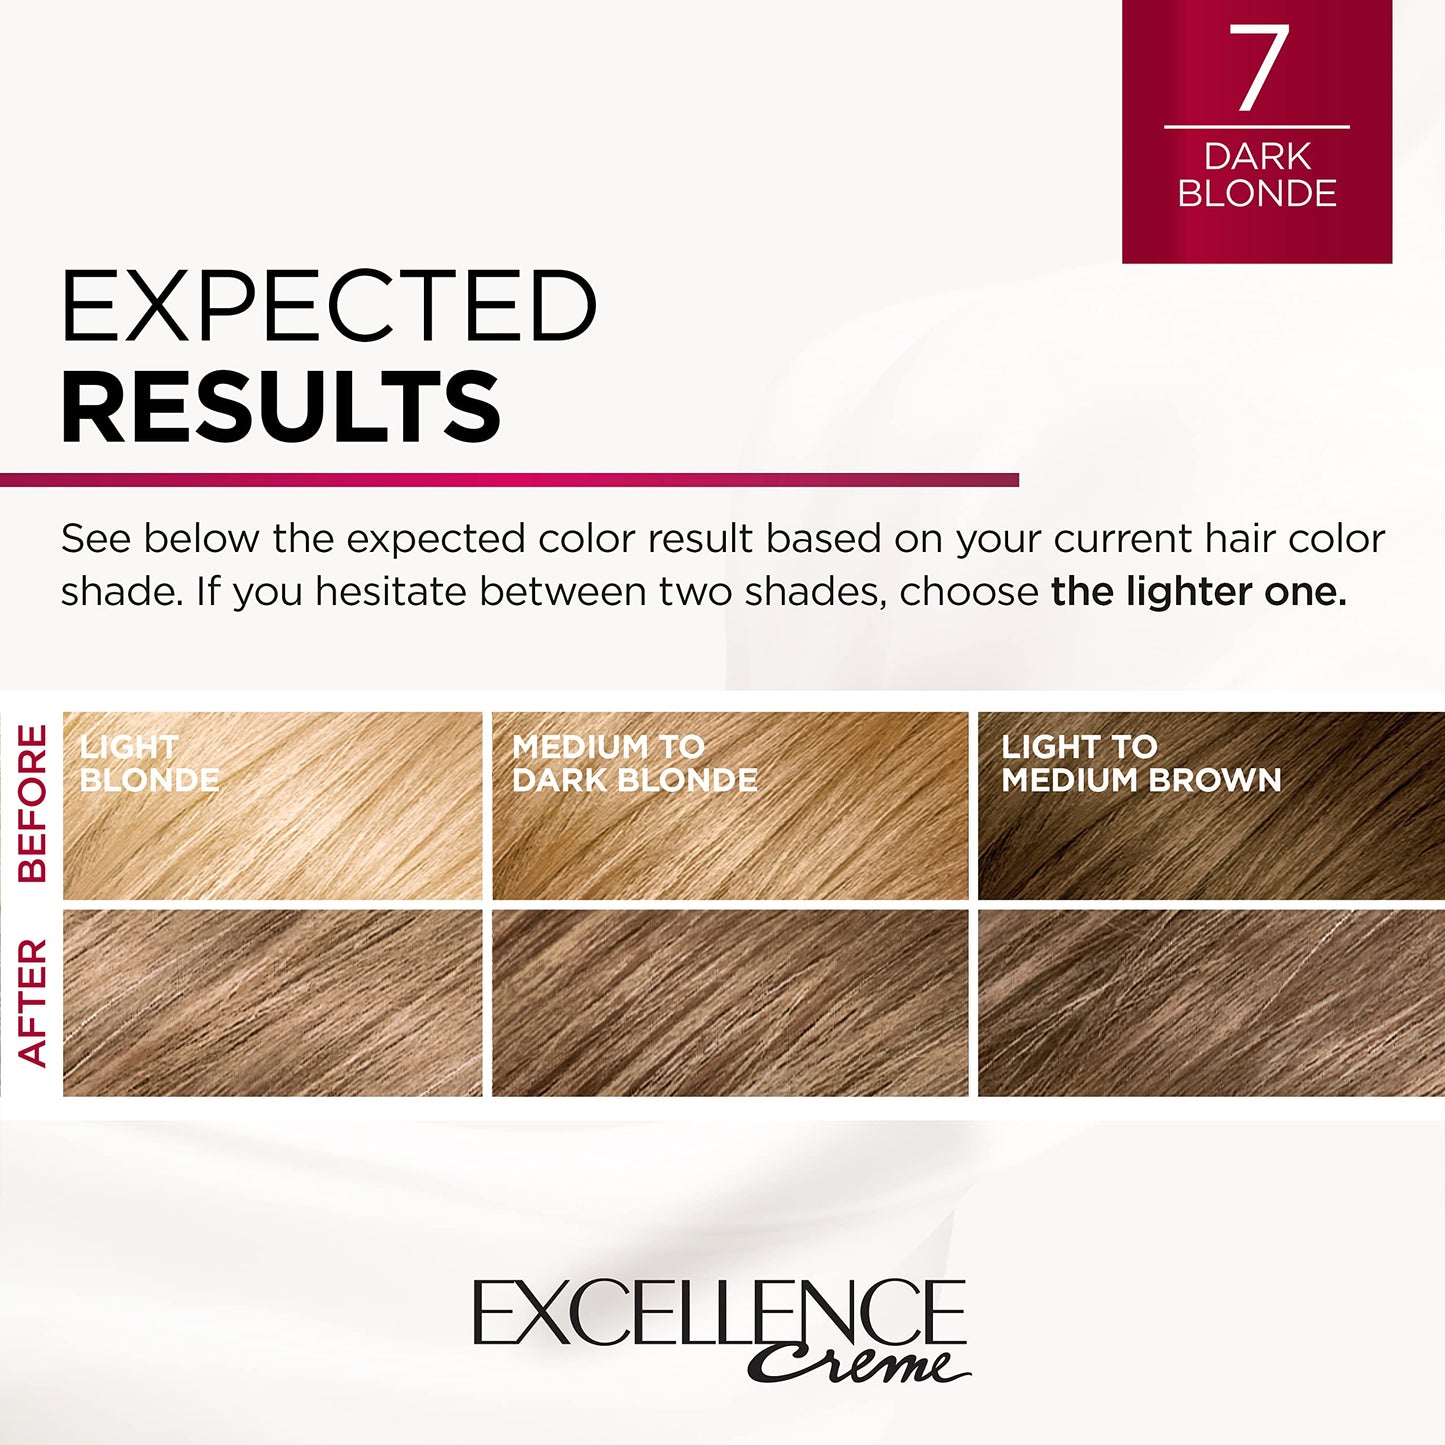 L'Oreal Paris Excellence Creme Permanent Triple Care Hair Color, 7 Dark Blonde, Gray Coverage For Up to 8 Weeks, All Hair Types, Pack of 1